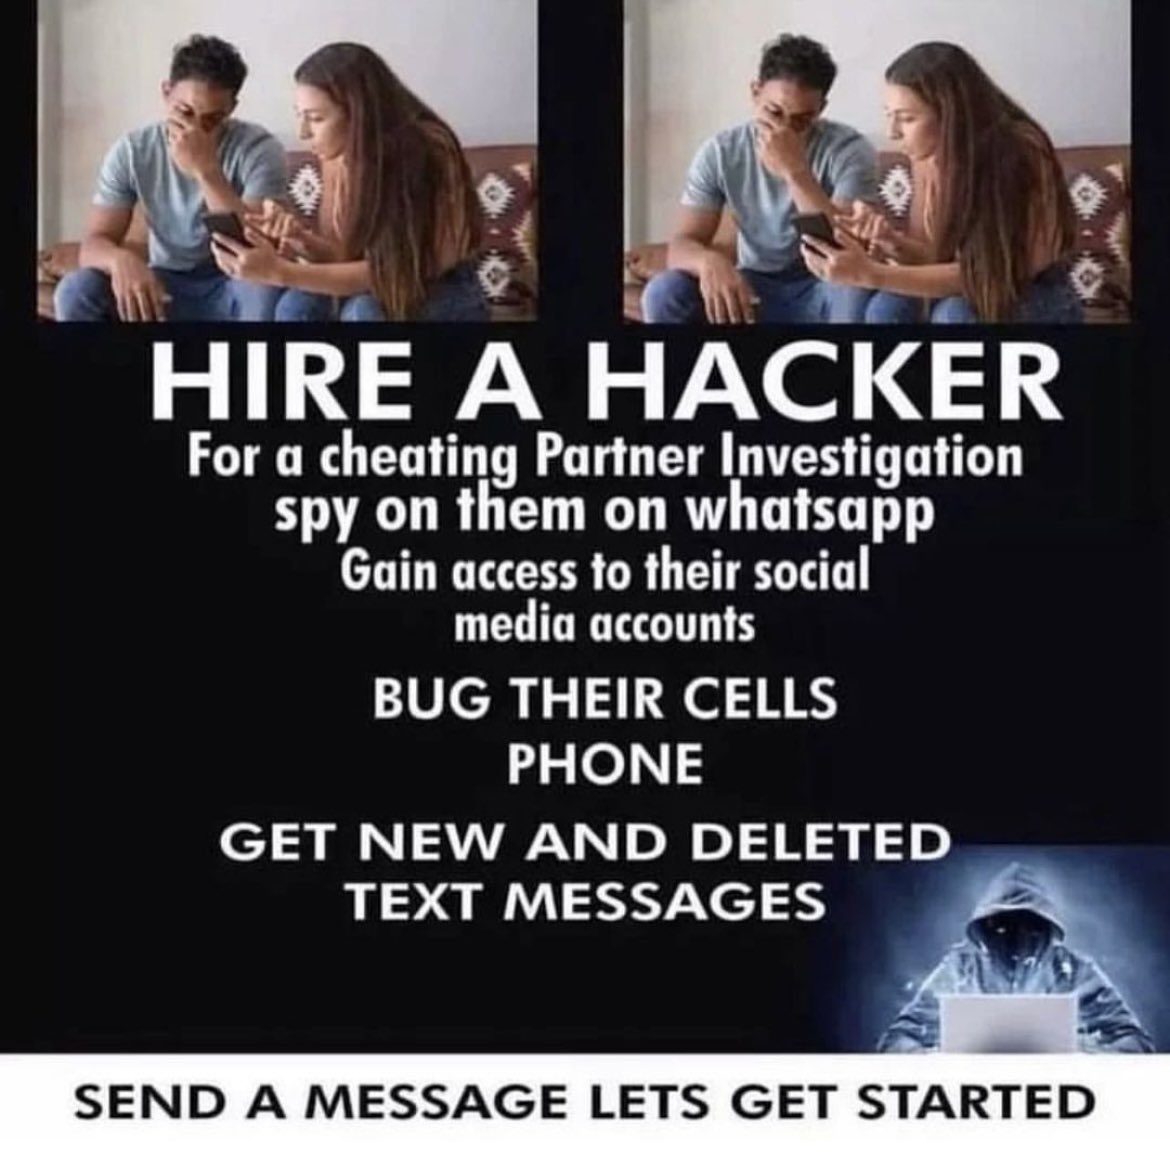 Dm #CanadianGP #cheatinginrelationship #love #weddings #marriage #mole #grades #viral #snapchat #instagram #clone #WhatsApp how to hack twitter